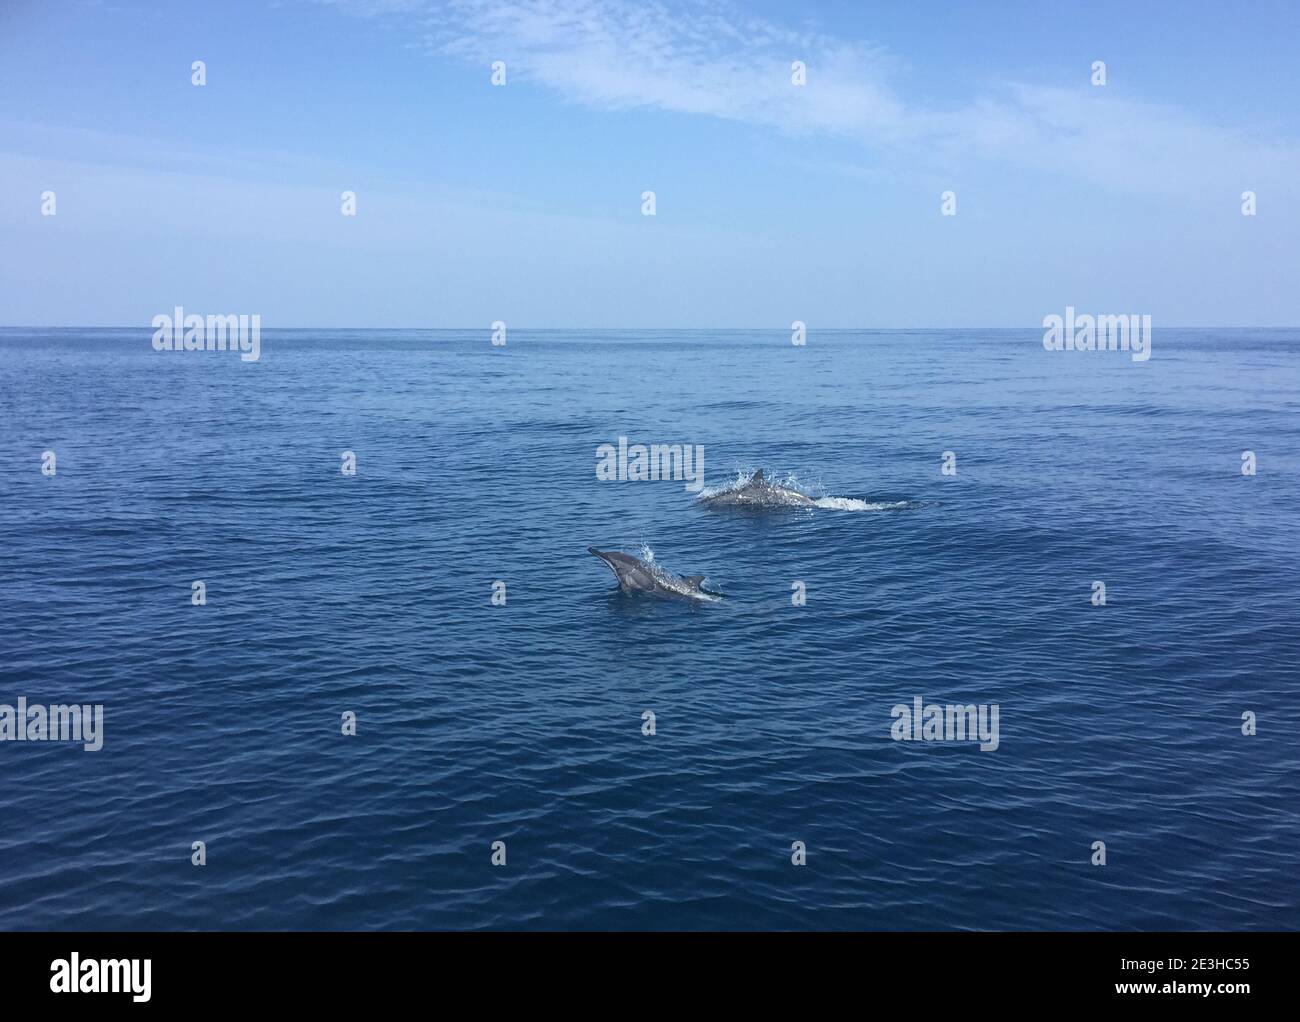 Dolphins swimming close to the shore of Muscat, Oman Stock Photo